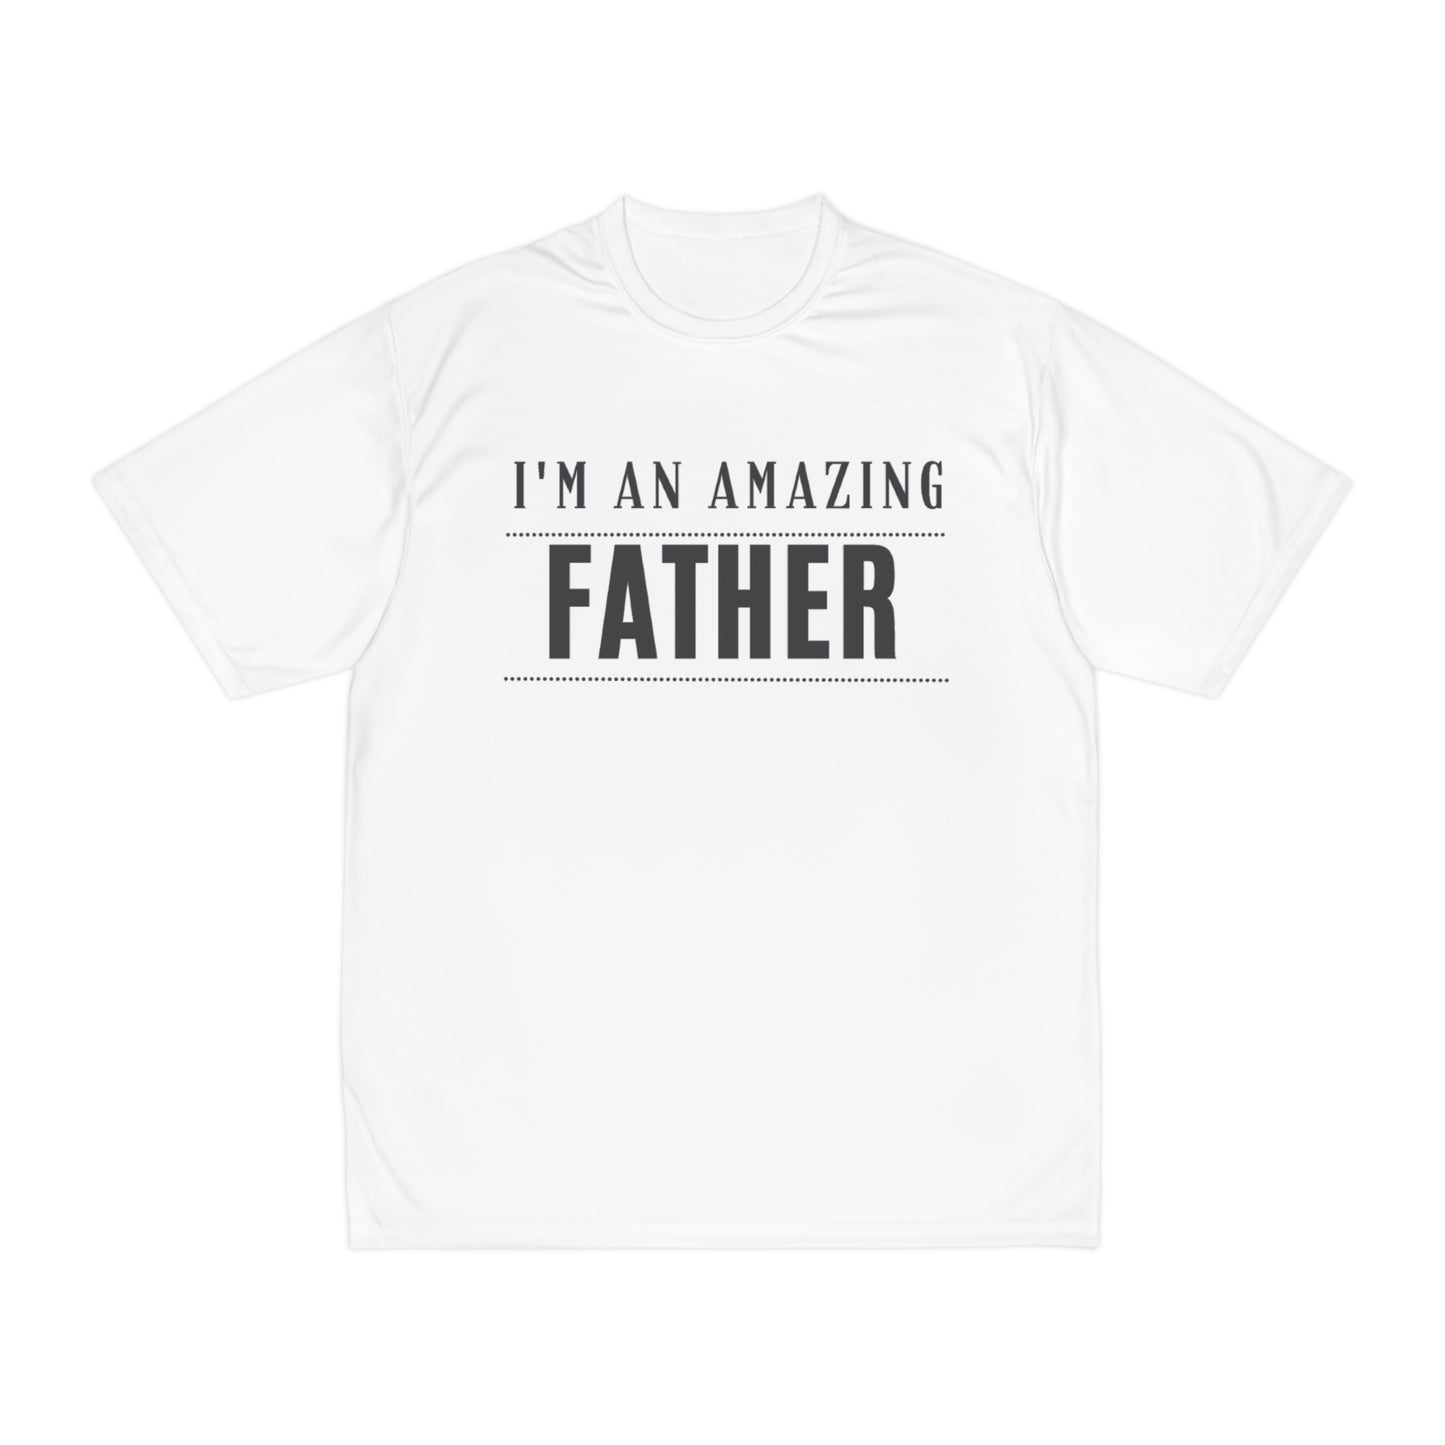 I'm an Amazing Father Men's Performance T-Shirt